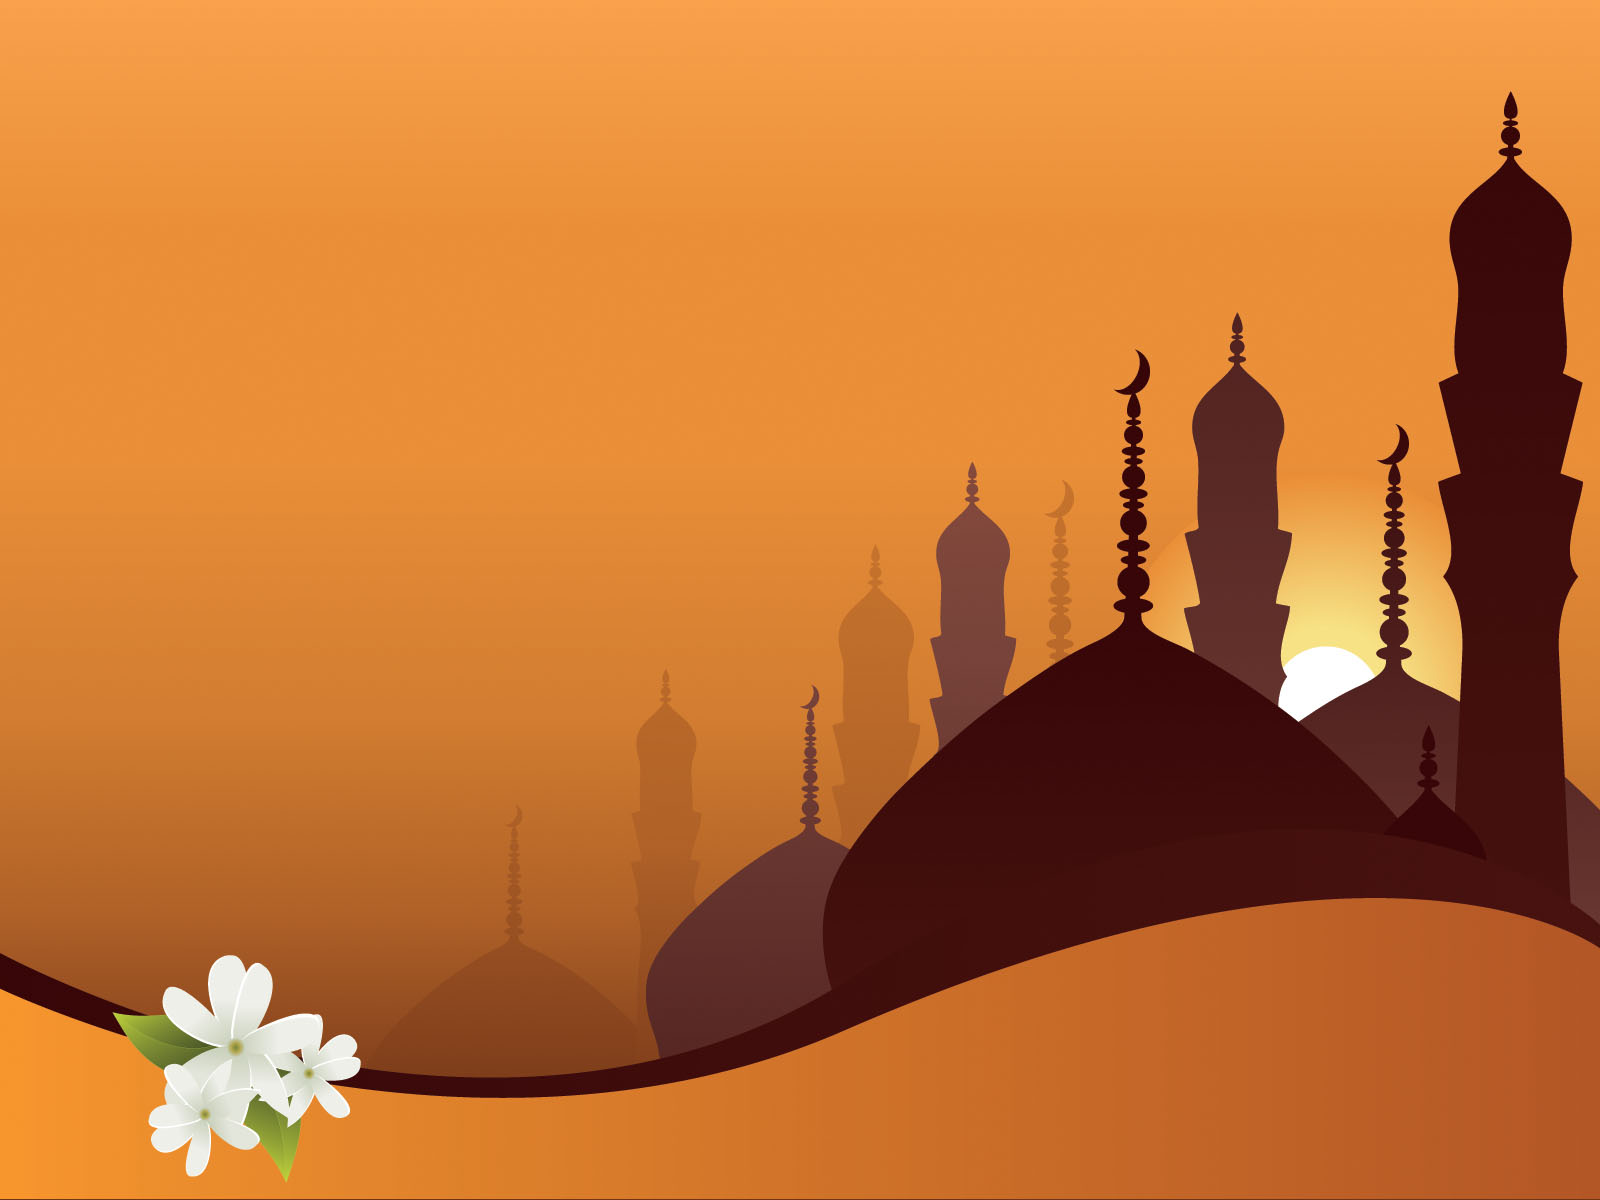 A Mosque on Orange Backgrounds